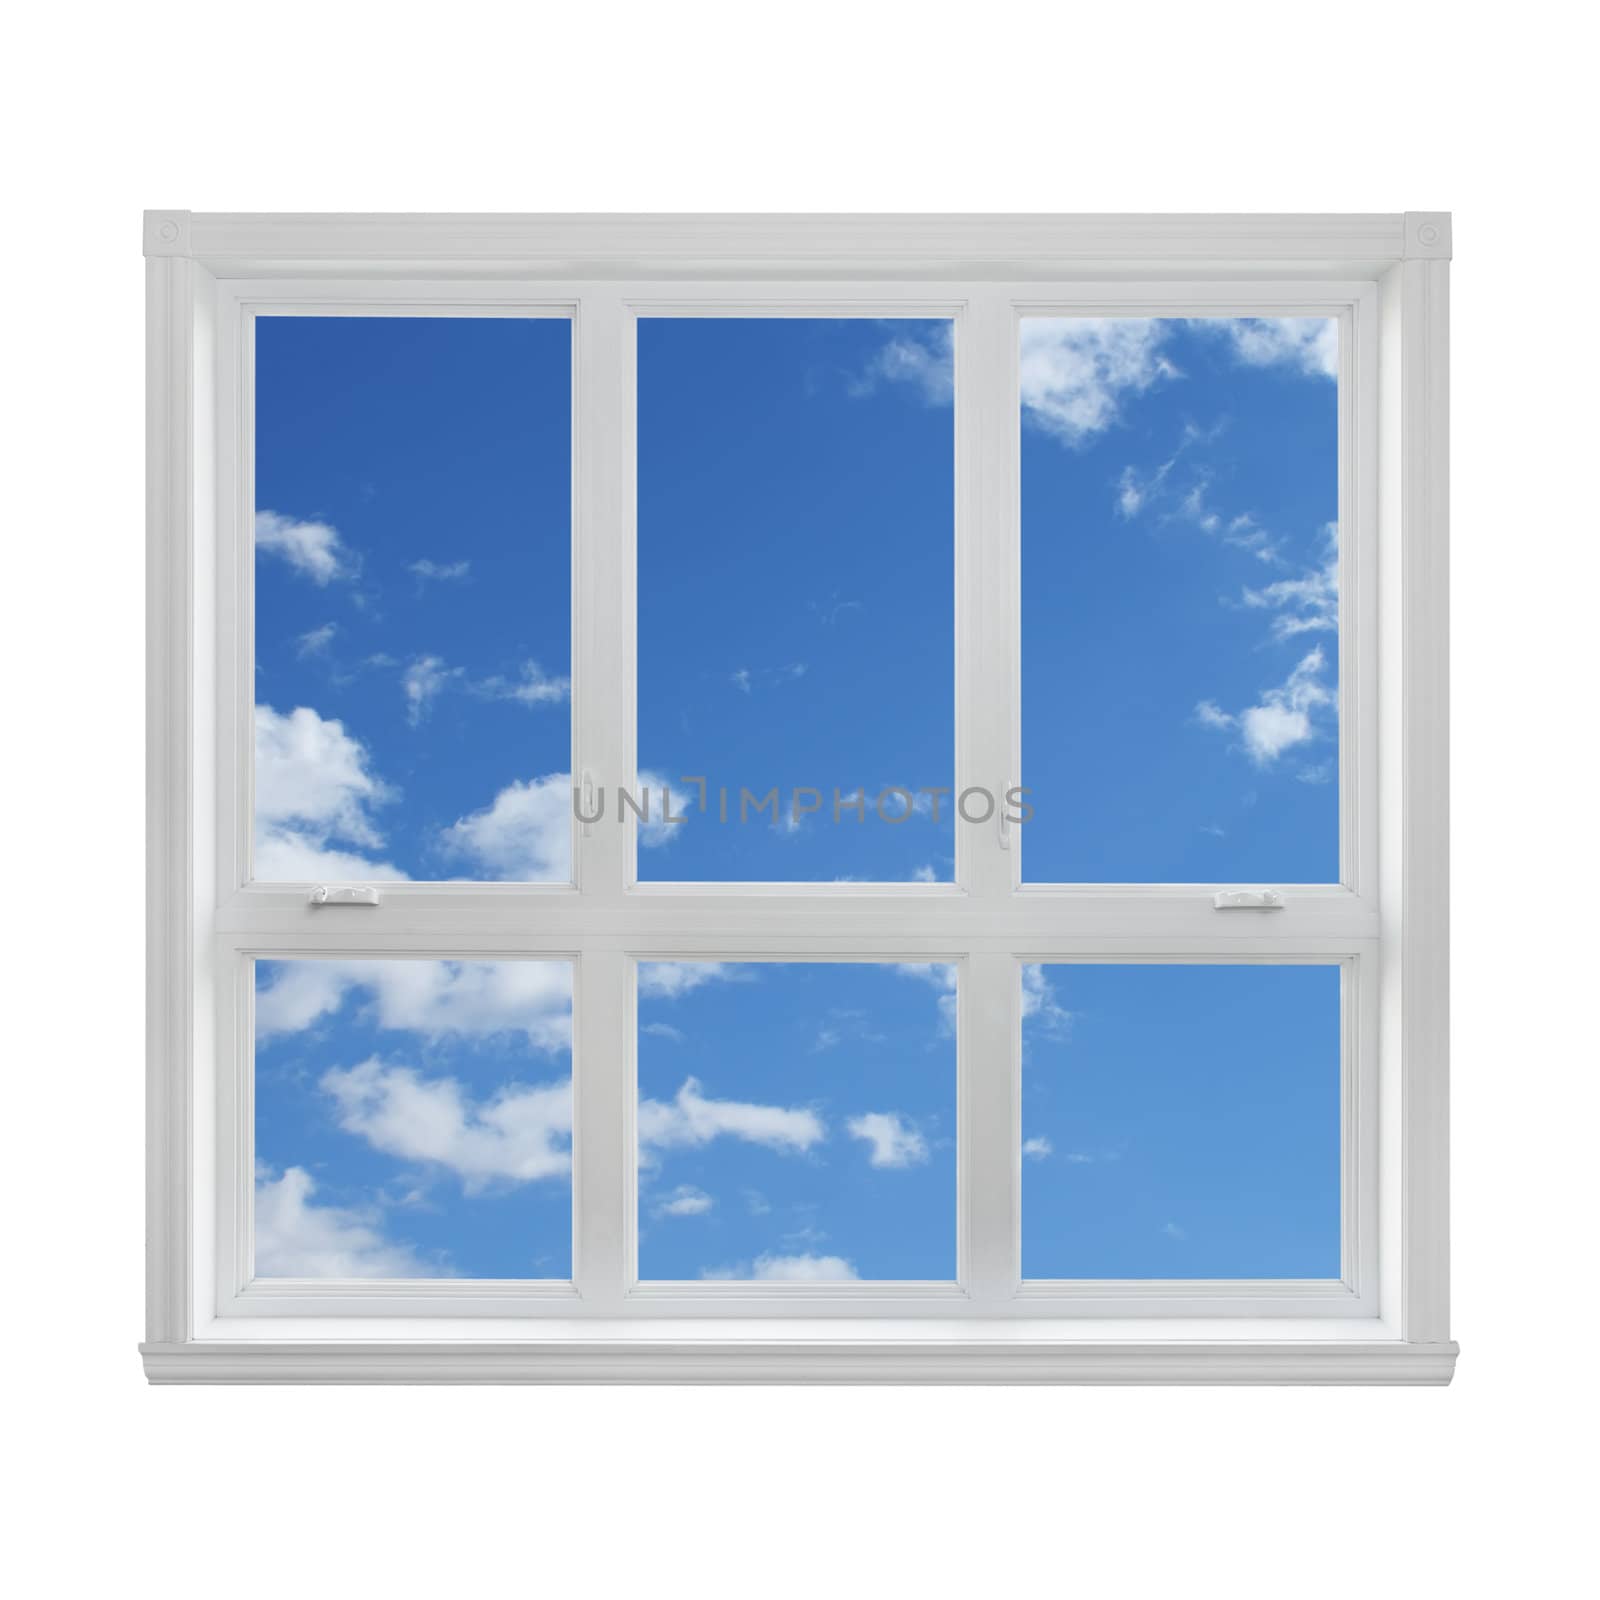 Blue sky with clouds seen through the window.